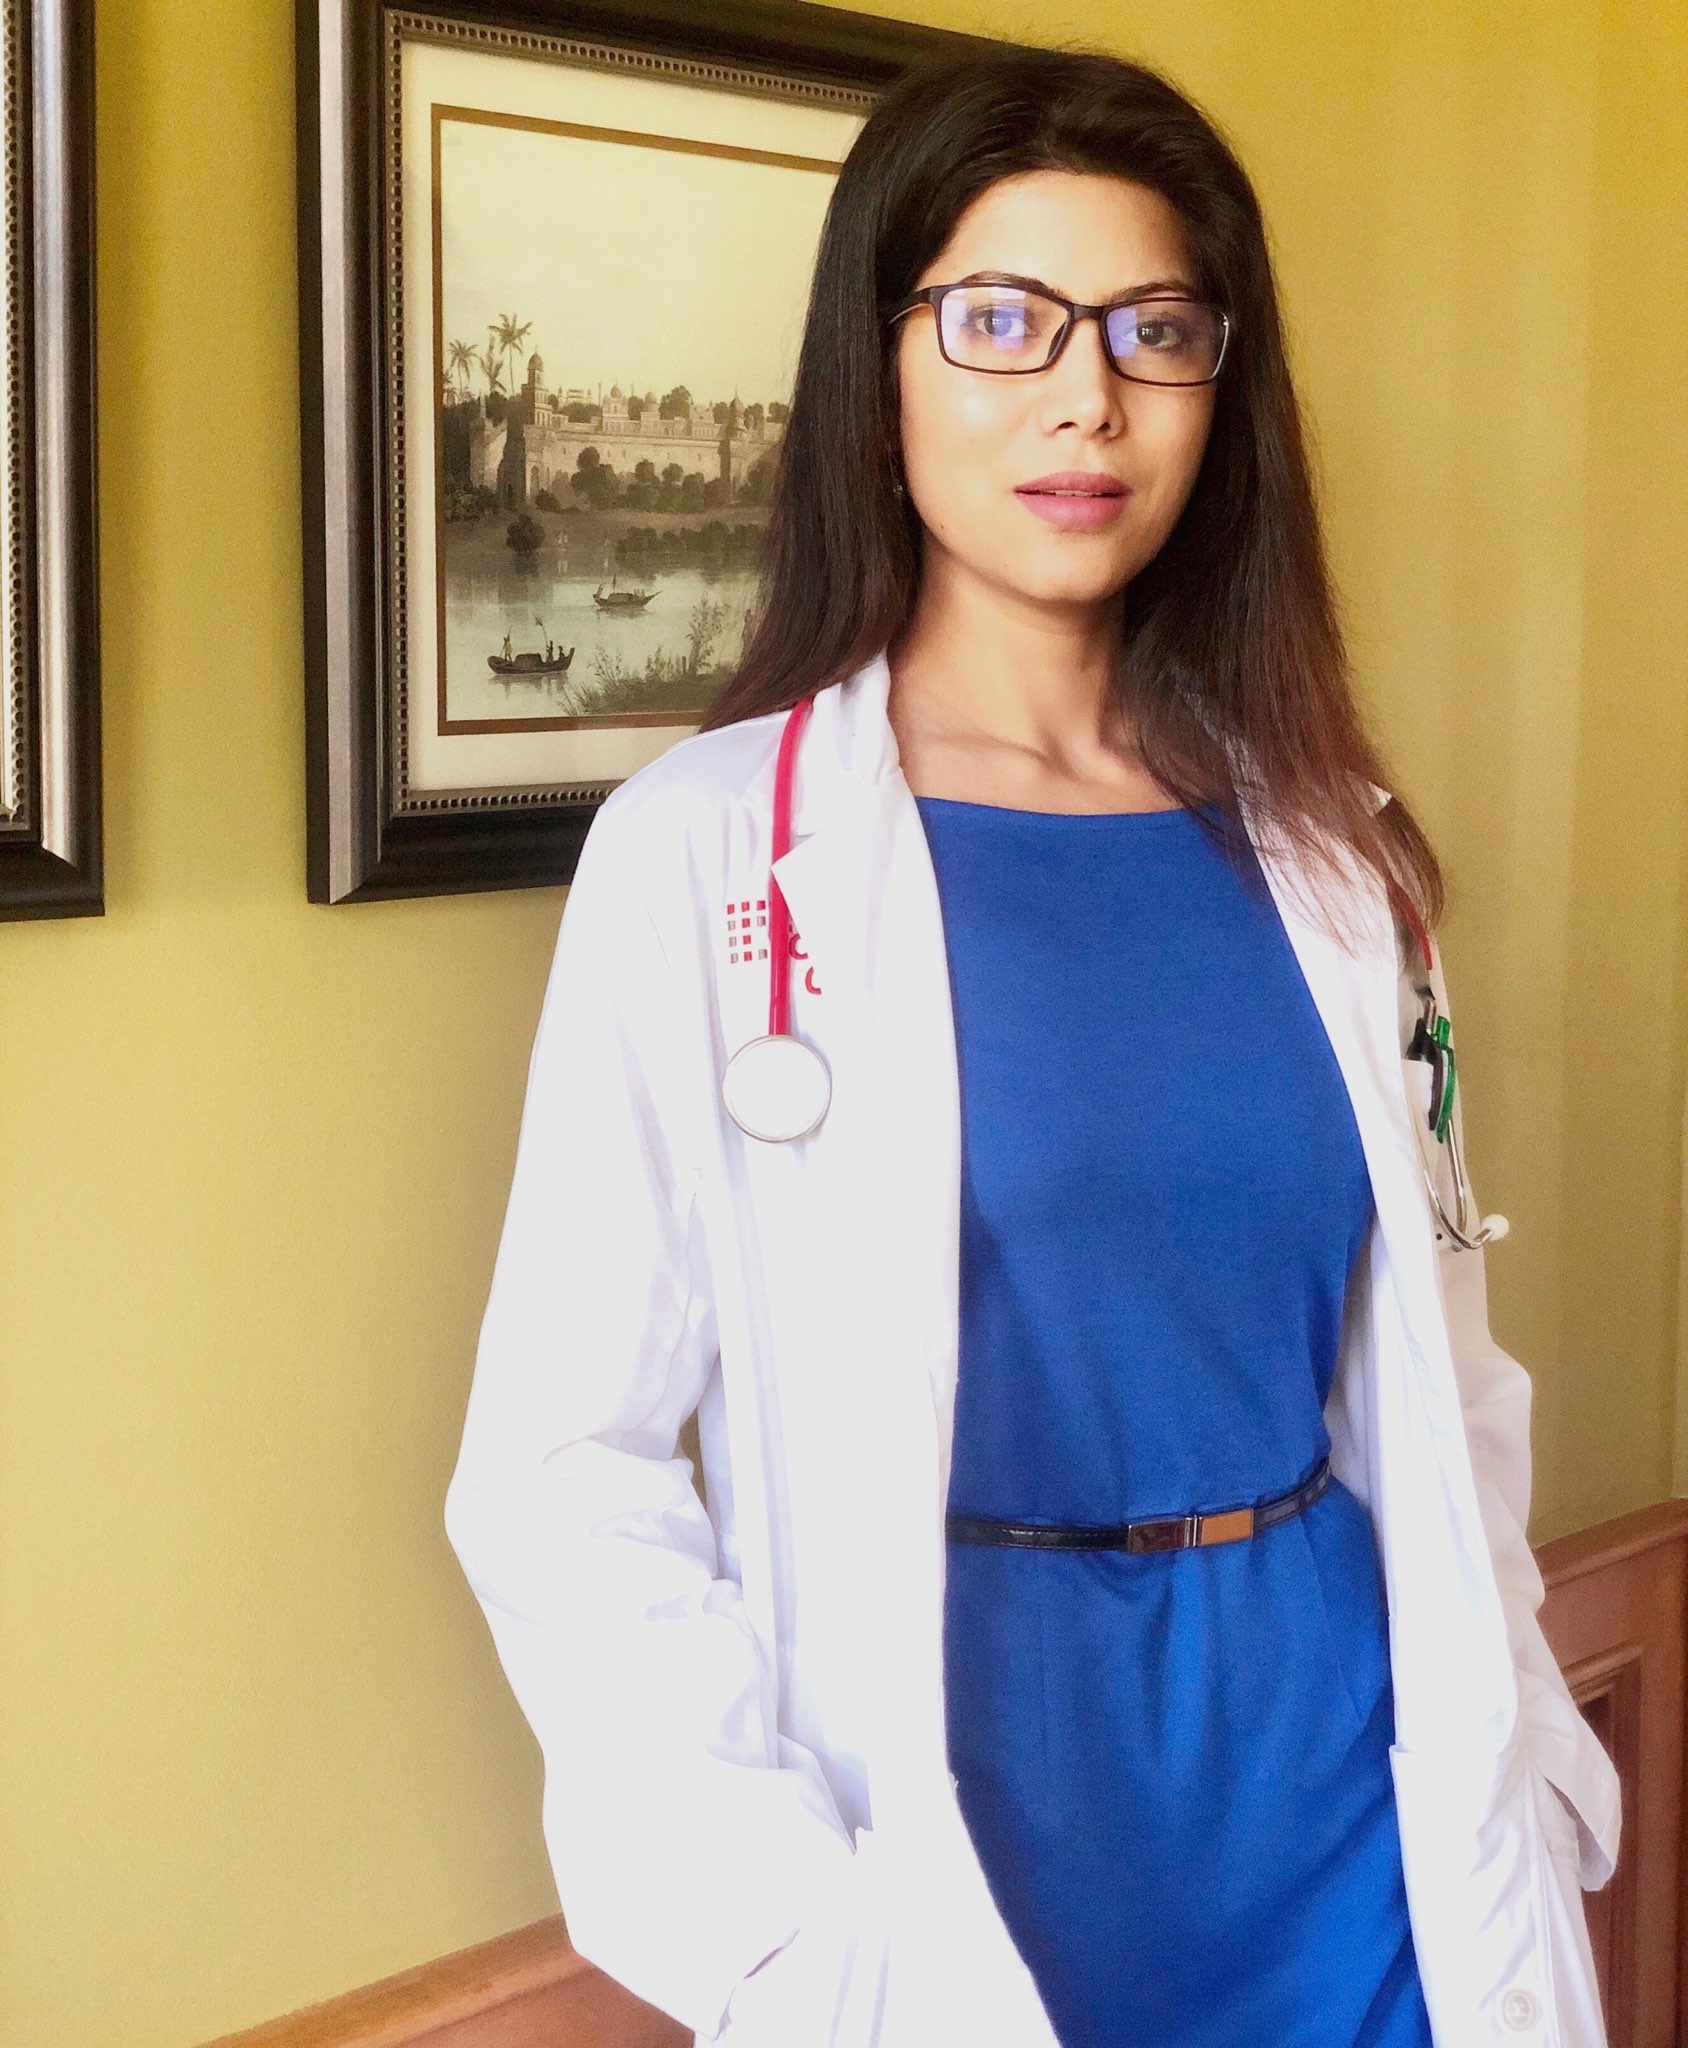 Dr. Ankita Singh Scholarship Announced: Aims to Support Future Doctors